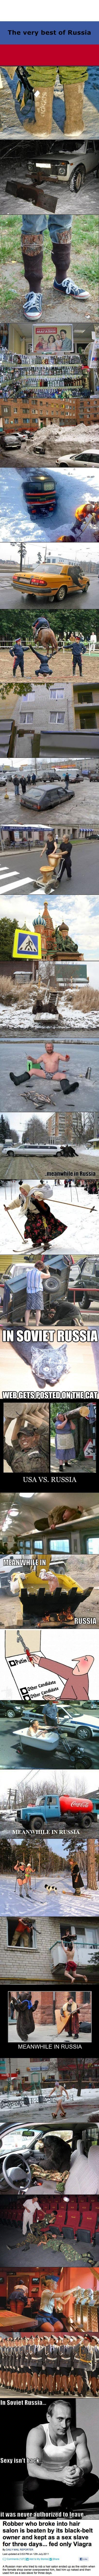 the very best of russia, compilation, lol